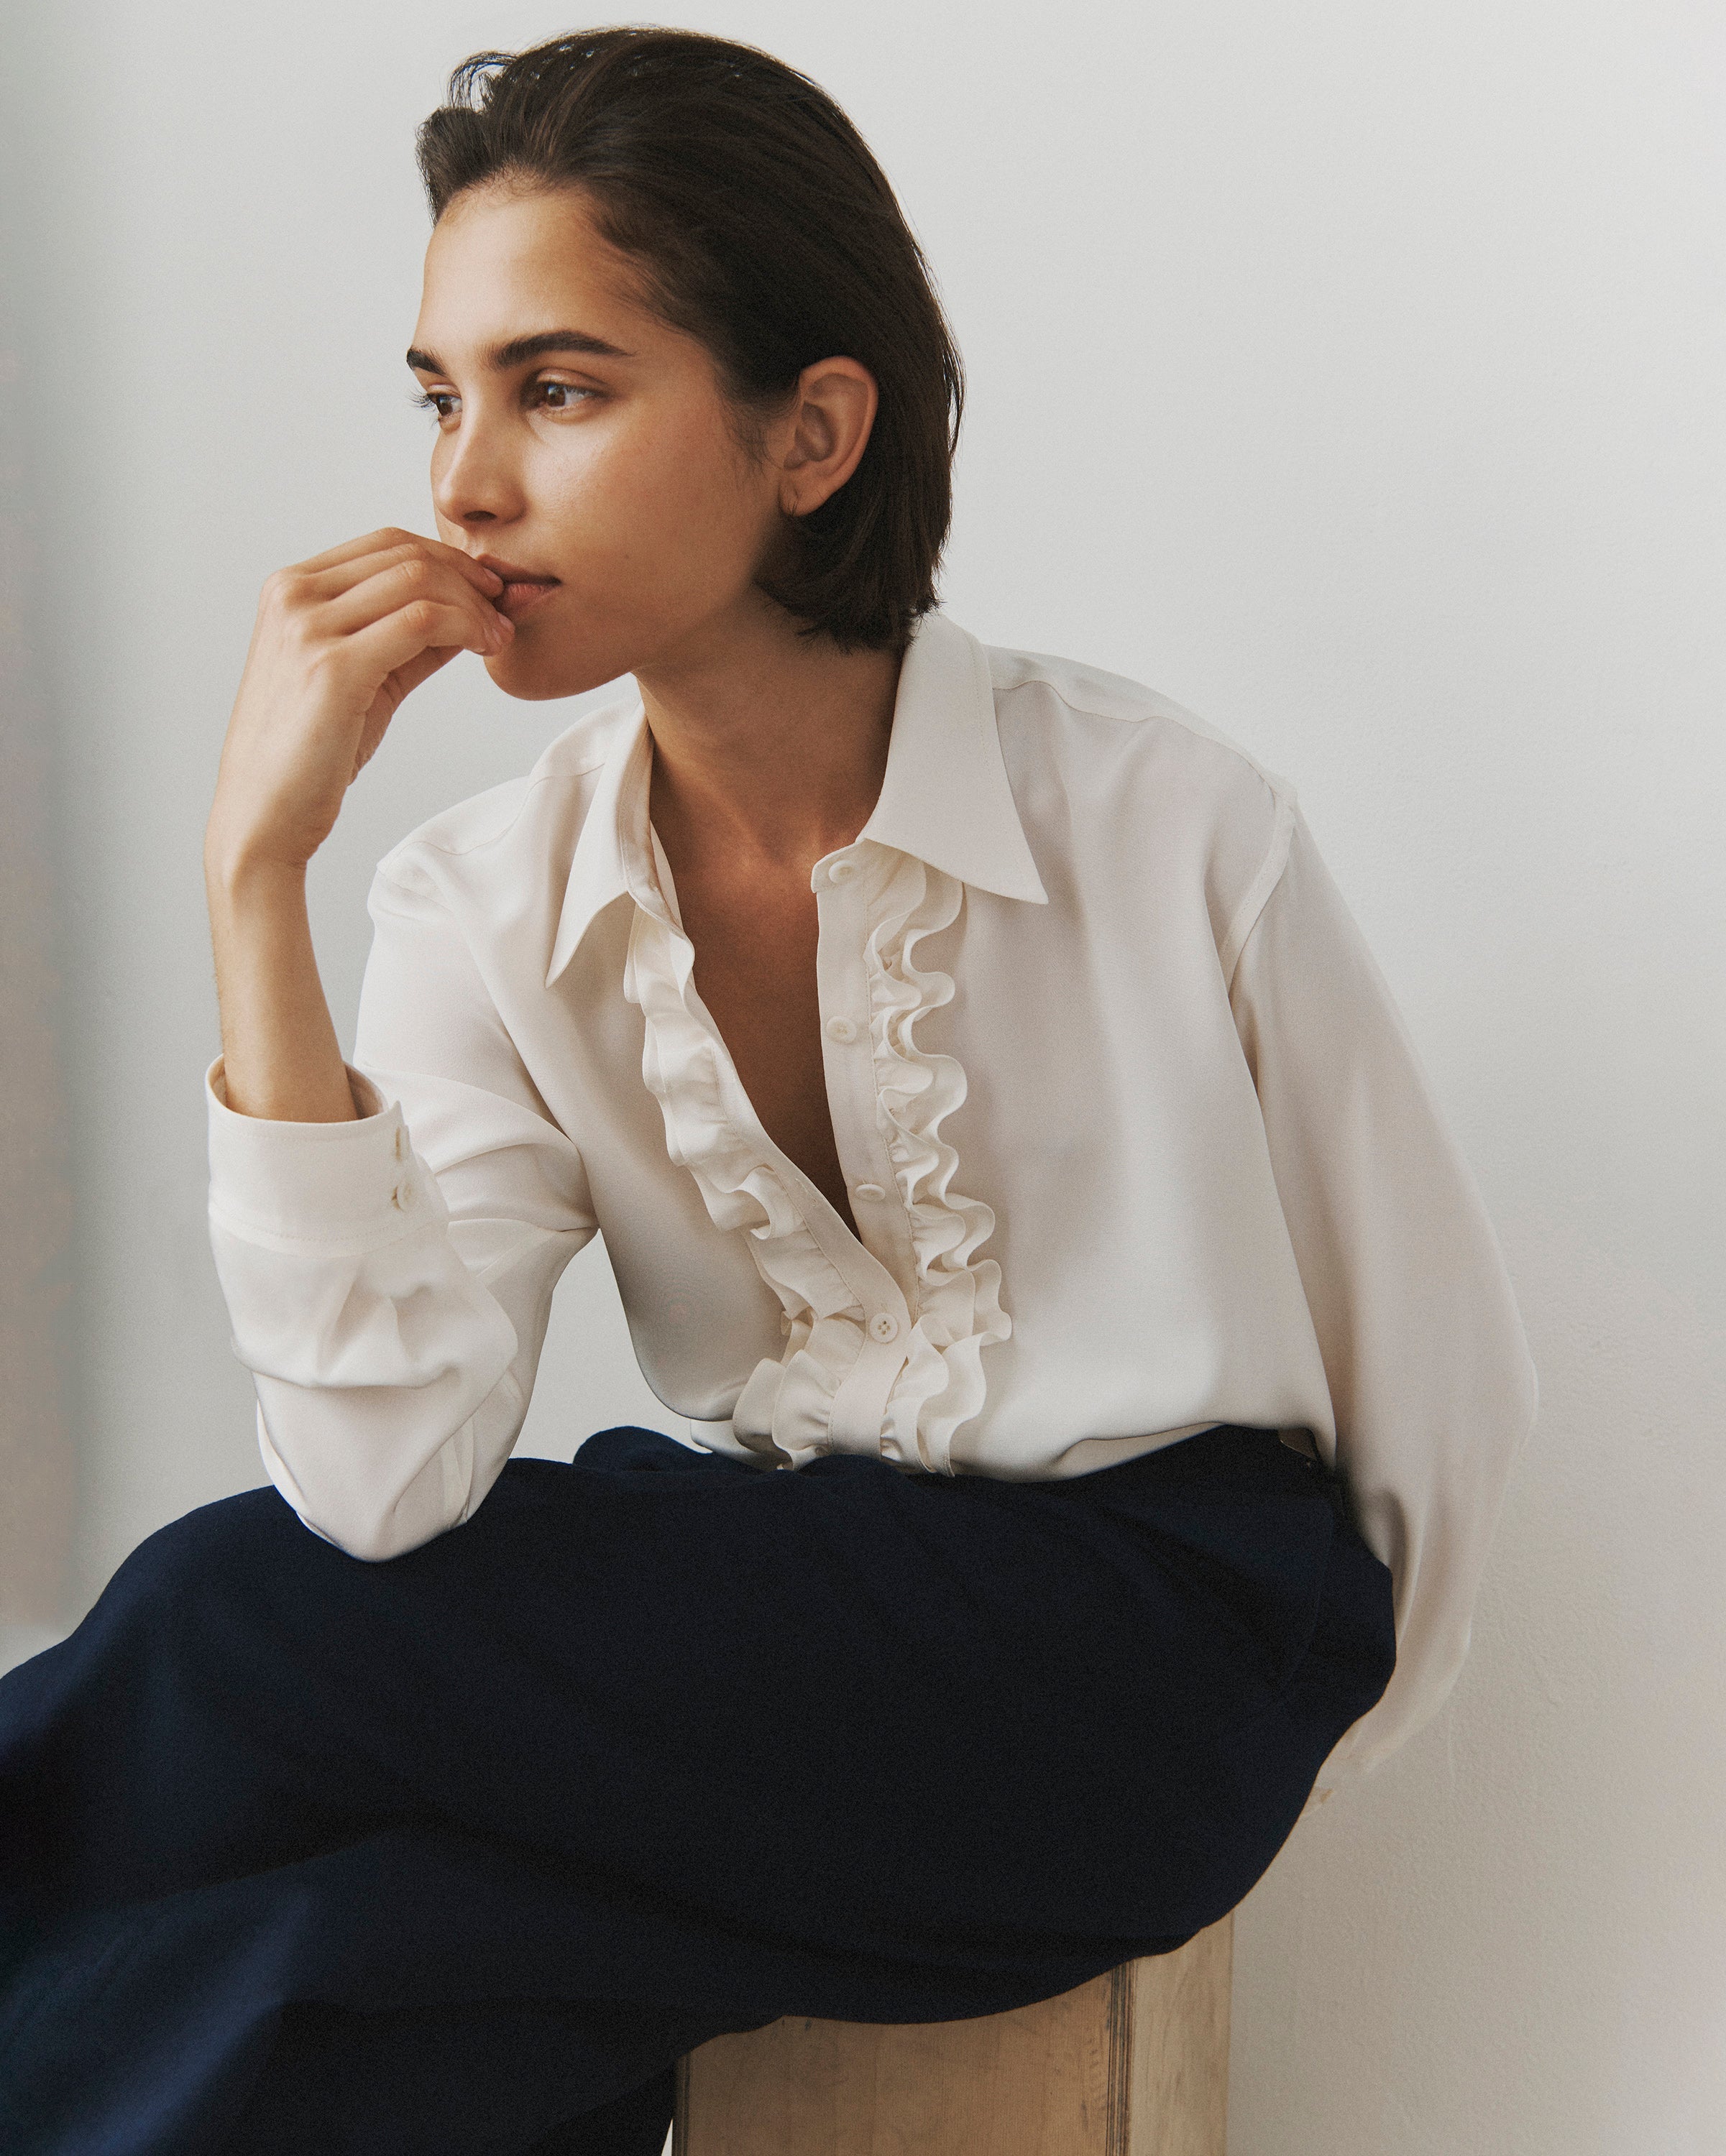 A woman sits slouched on a wooden stool, wearing black trousers and a cream silk button down with ruffles at the cuffs and placket.